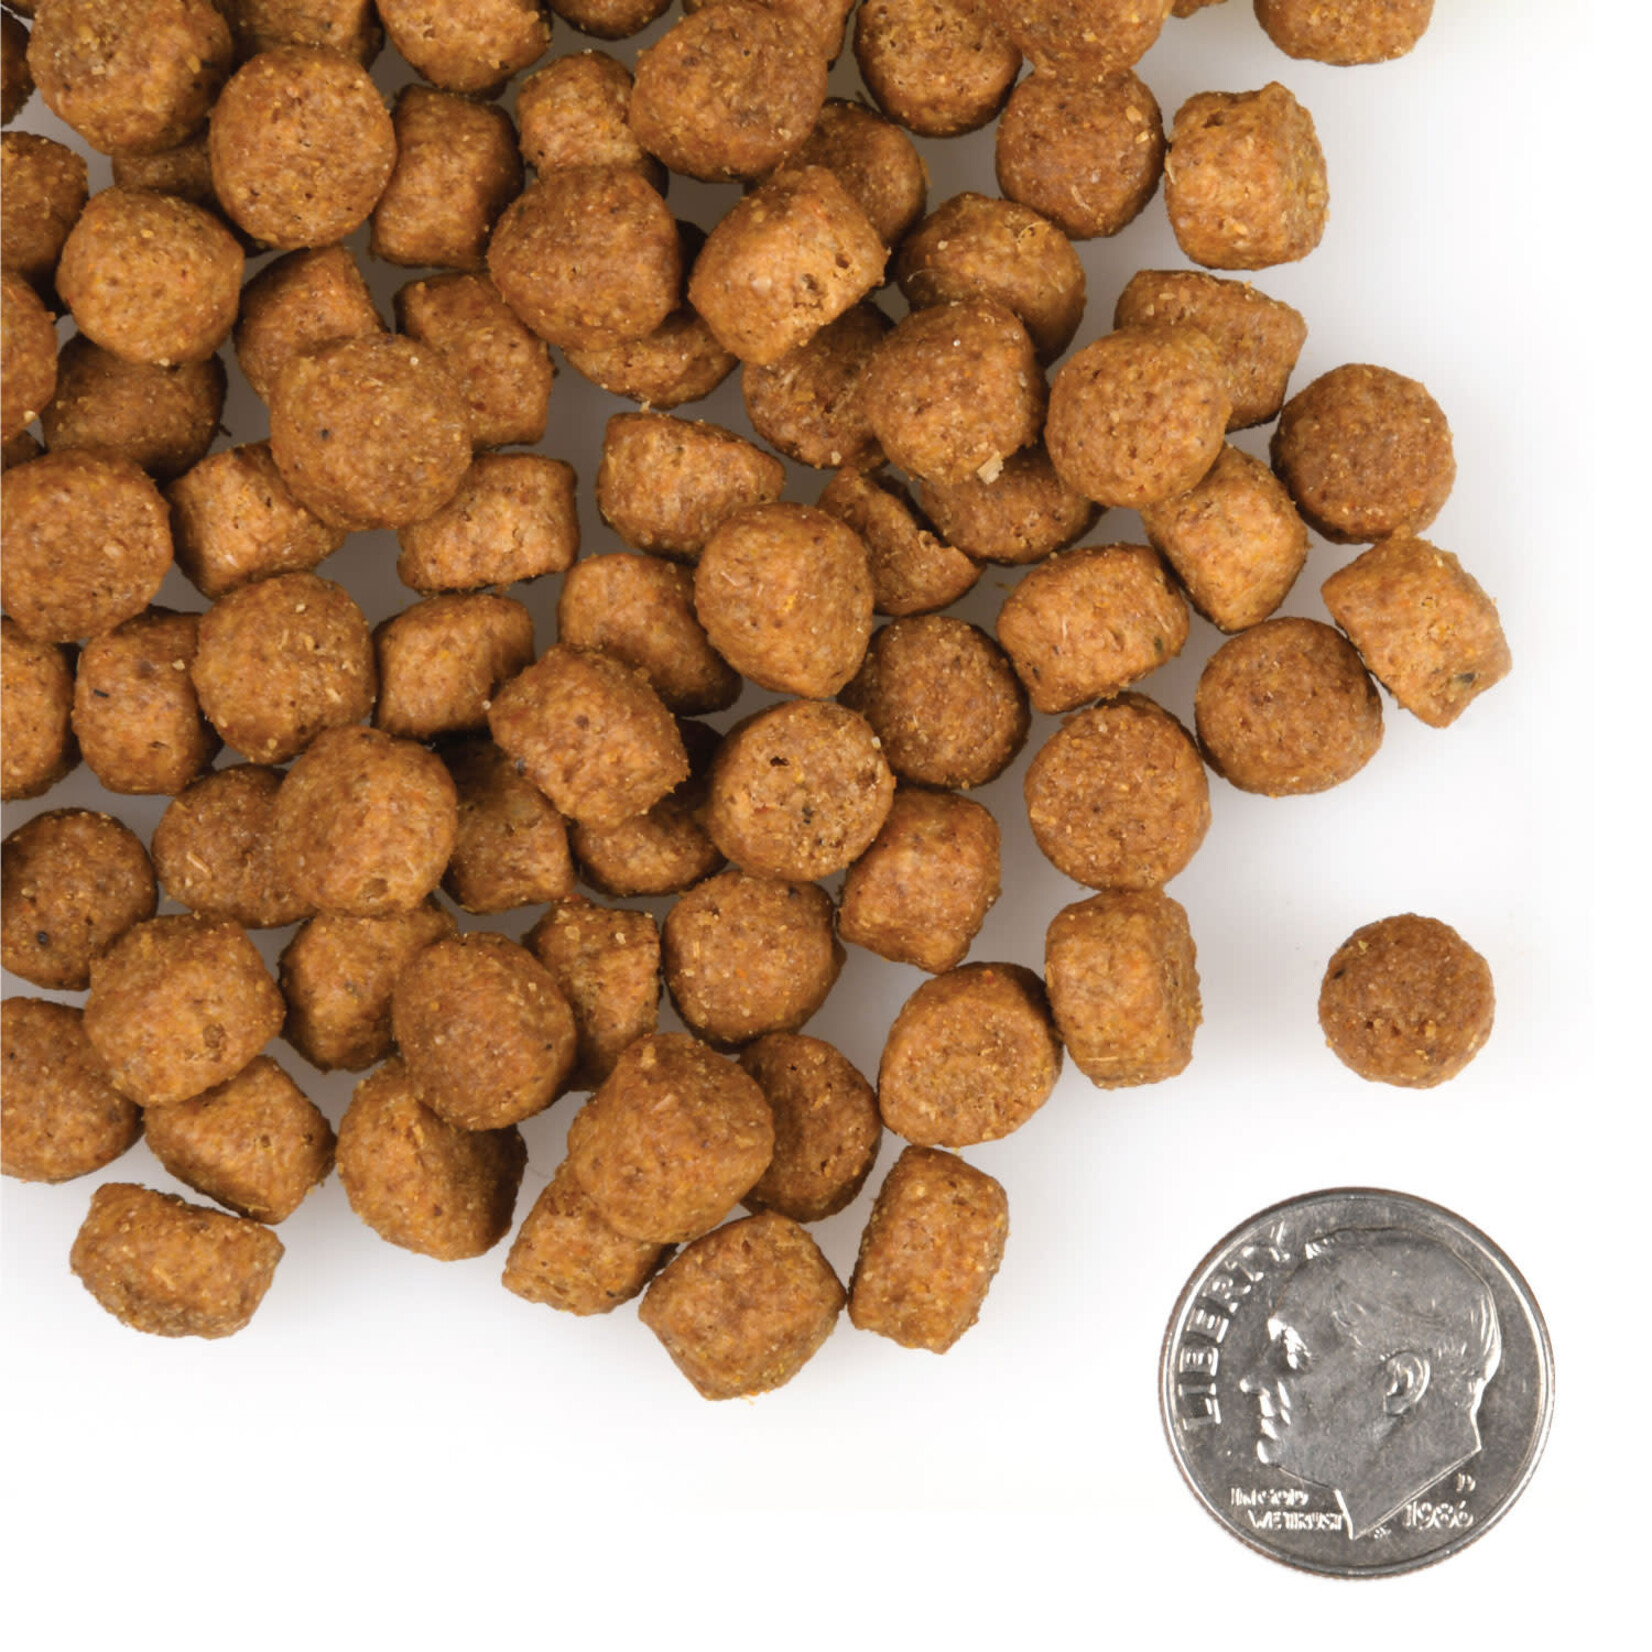 Fromm Large Breed Puppy Gold Dry Dog Food